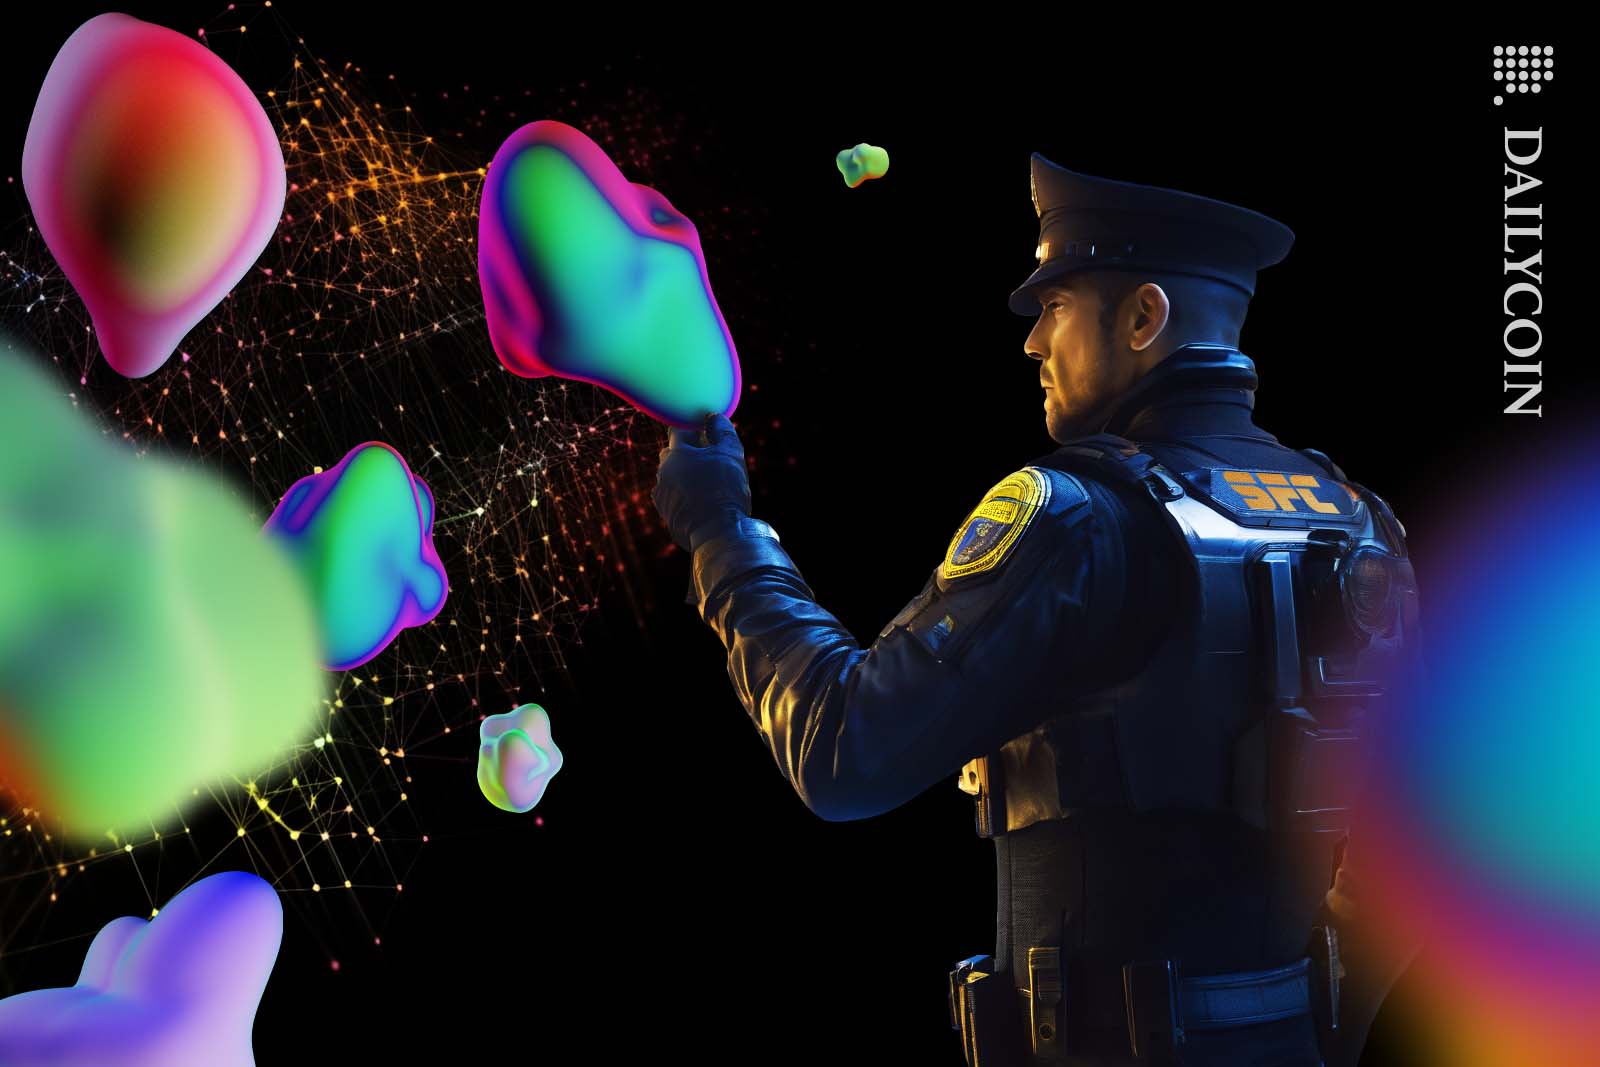 Futuristic police officer examining an iridescent unidentified object.